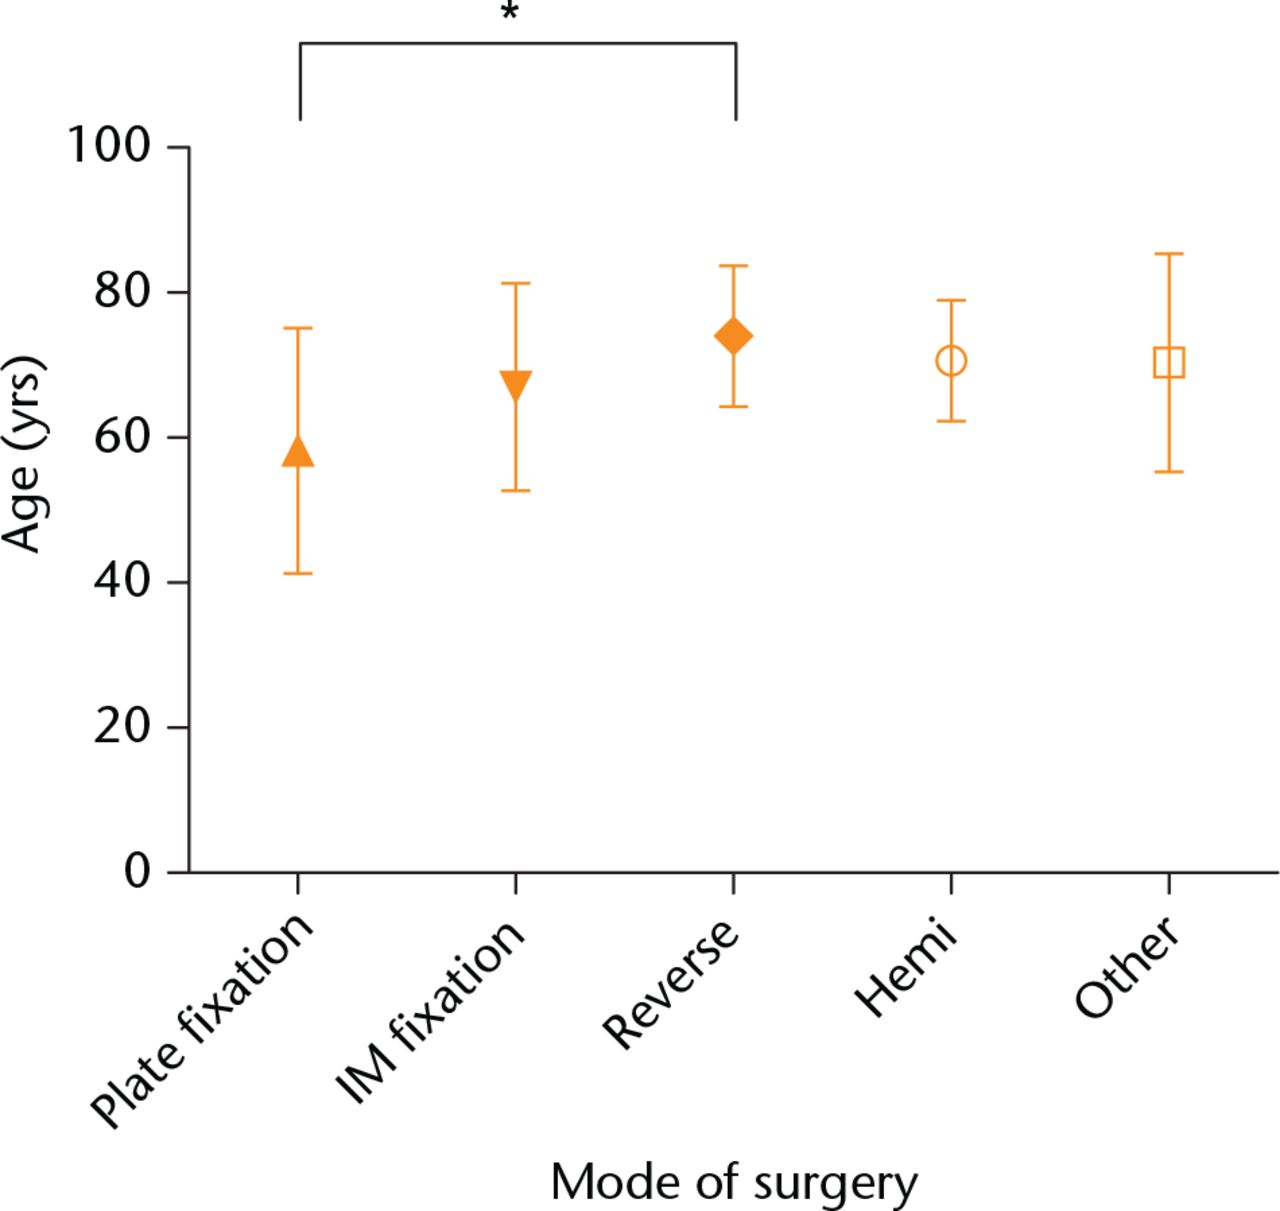 Fig. 1 
            Graph demonstrating the ages of the different modes of surgery groups. The symbols represent mean, while the bars represent a standard deviation above and below the mean. Statistical significance denoted by *p < 0.05, **p < 0.01, ***p < 0.0001 (Tukey’s multiple comparison test).
          